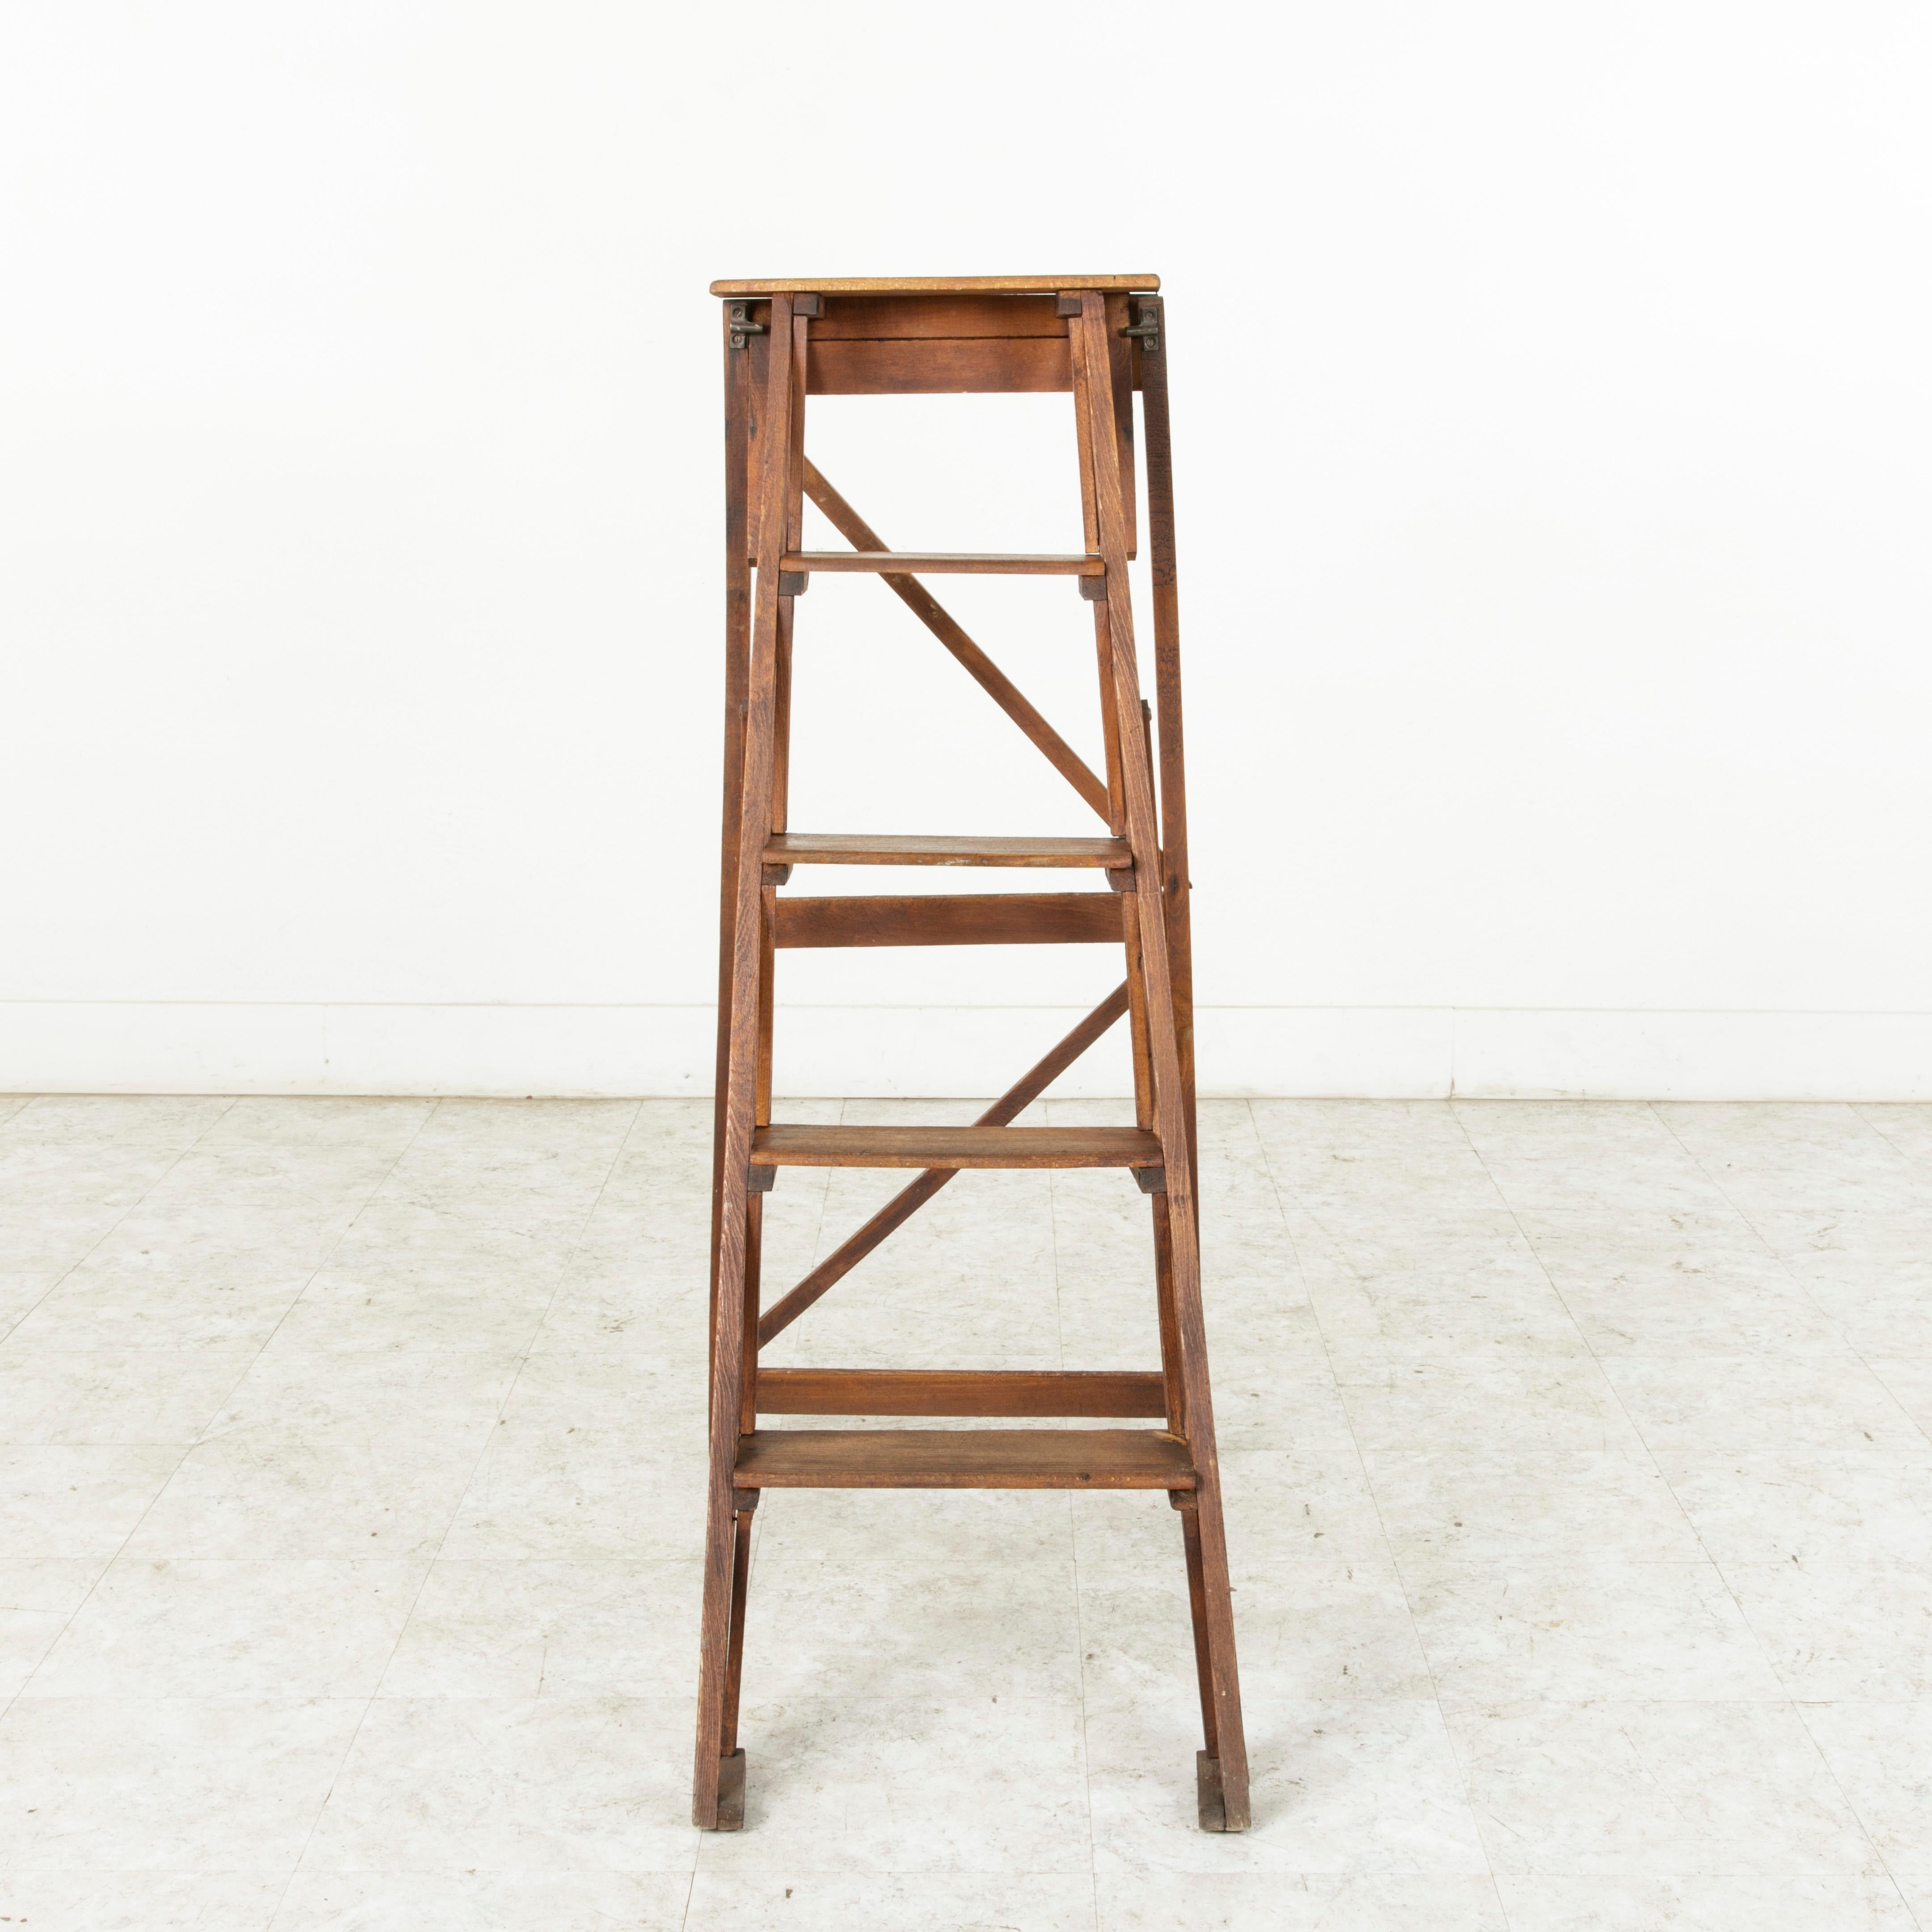 Originally used in a French library, this folding ladder constructed of ash would be a handsome addition to any space with hard to reach shelving. While still being utilitarian, this ladder also maintains an artistic presence that allows its five